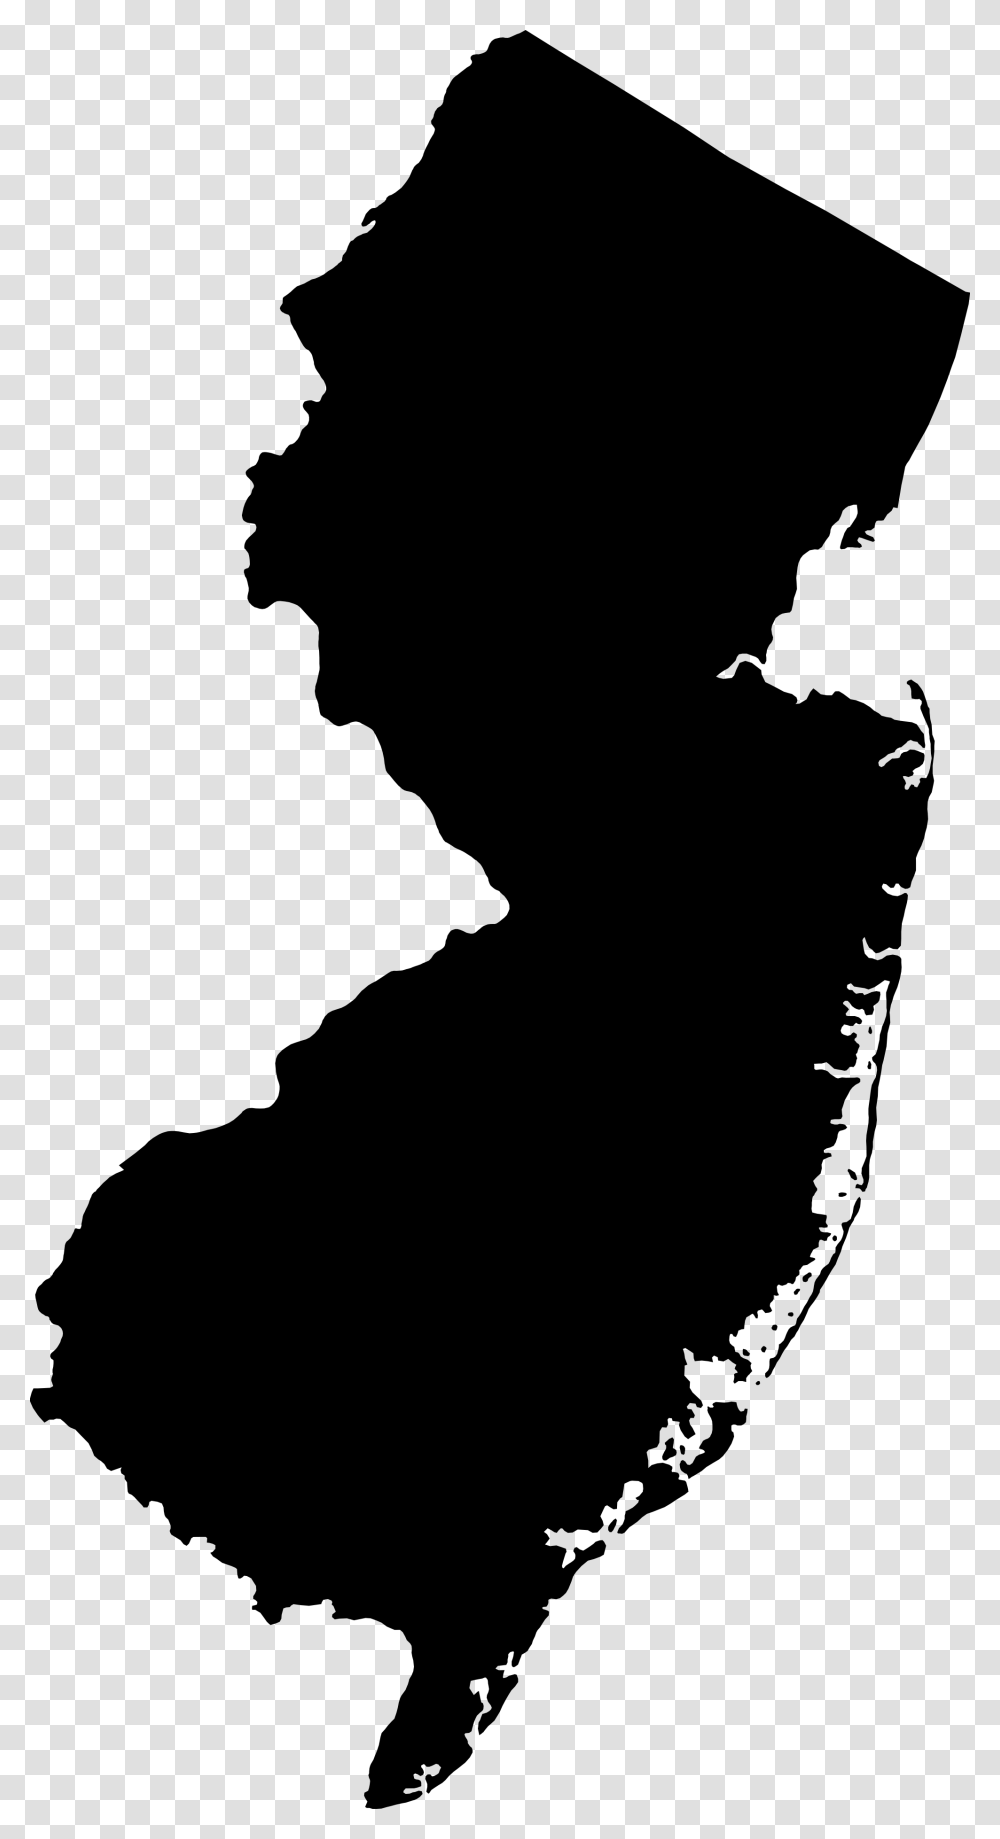 New Jersey Outline Shaded Map New Jersey Map Black, Gray Transparent Png